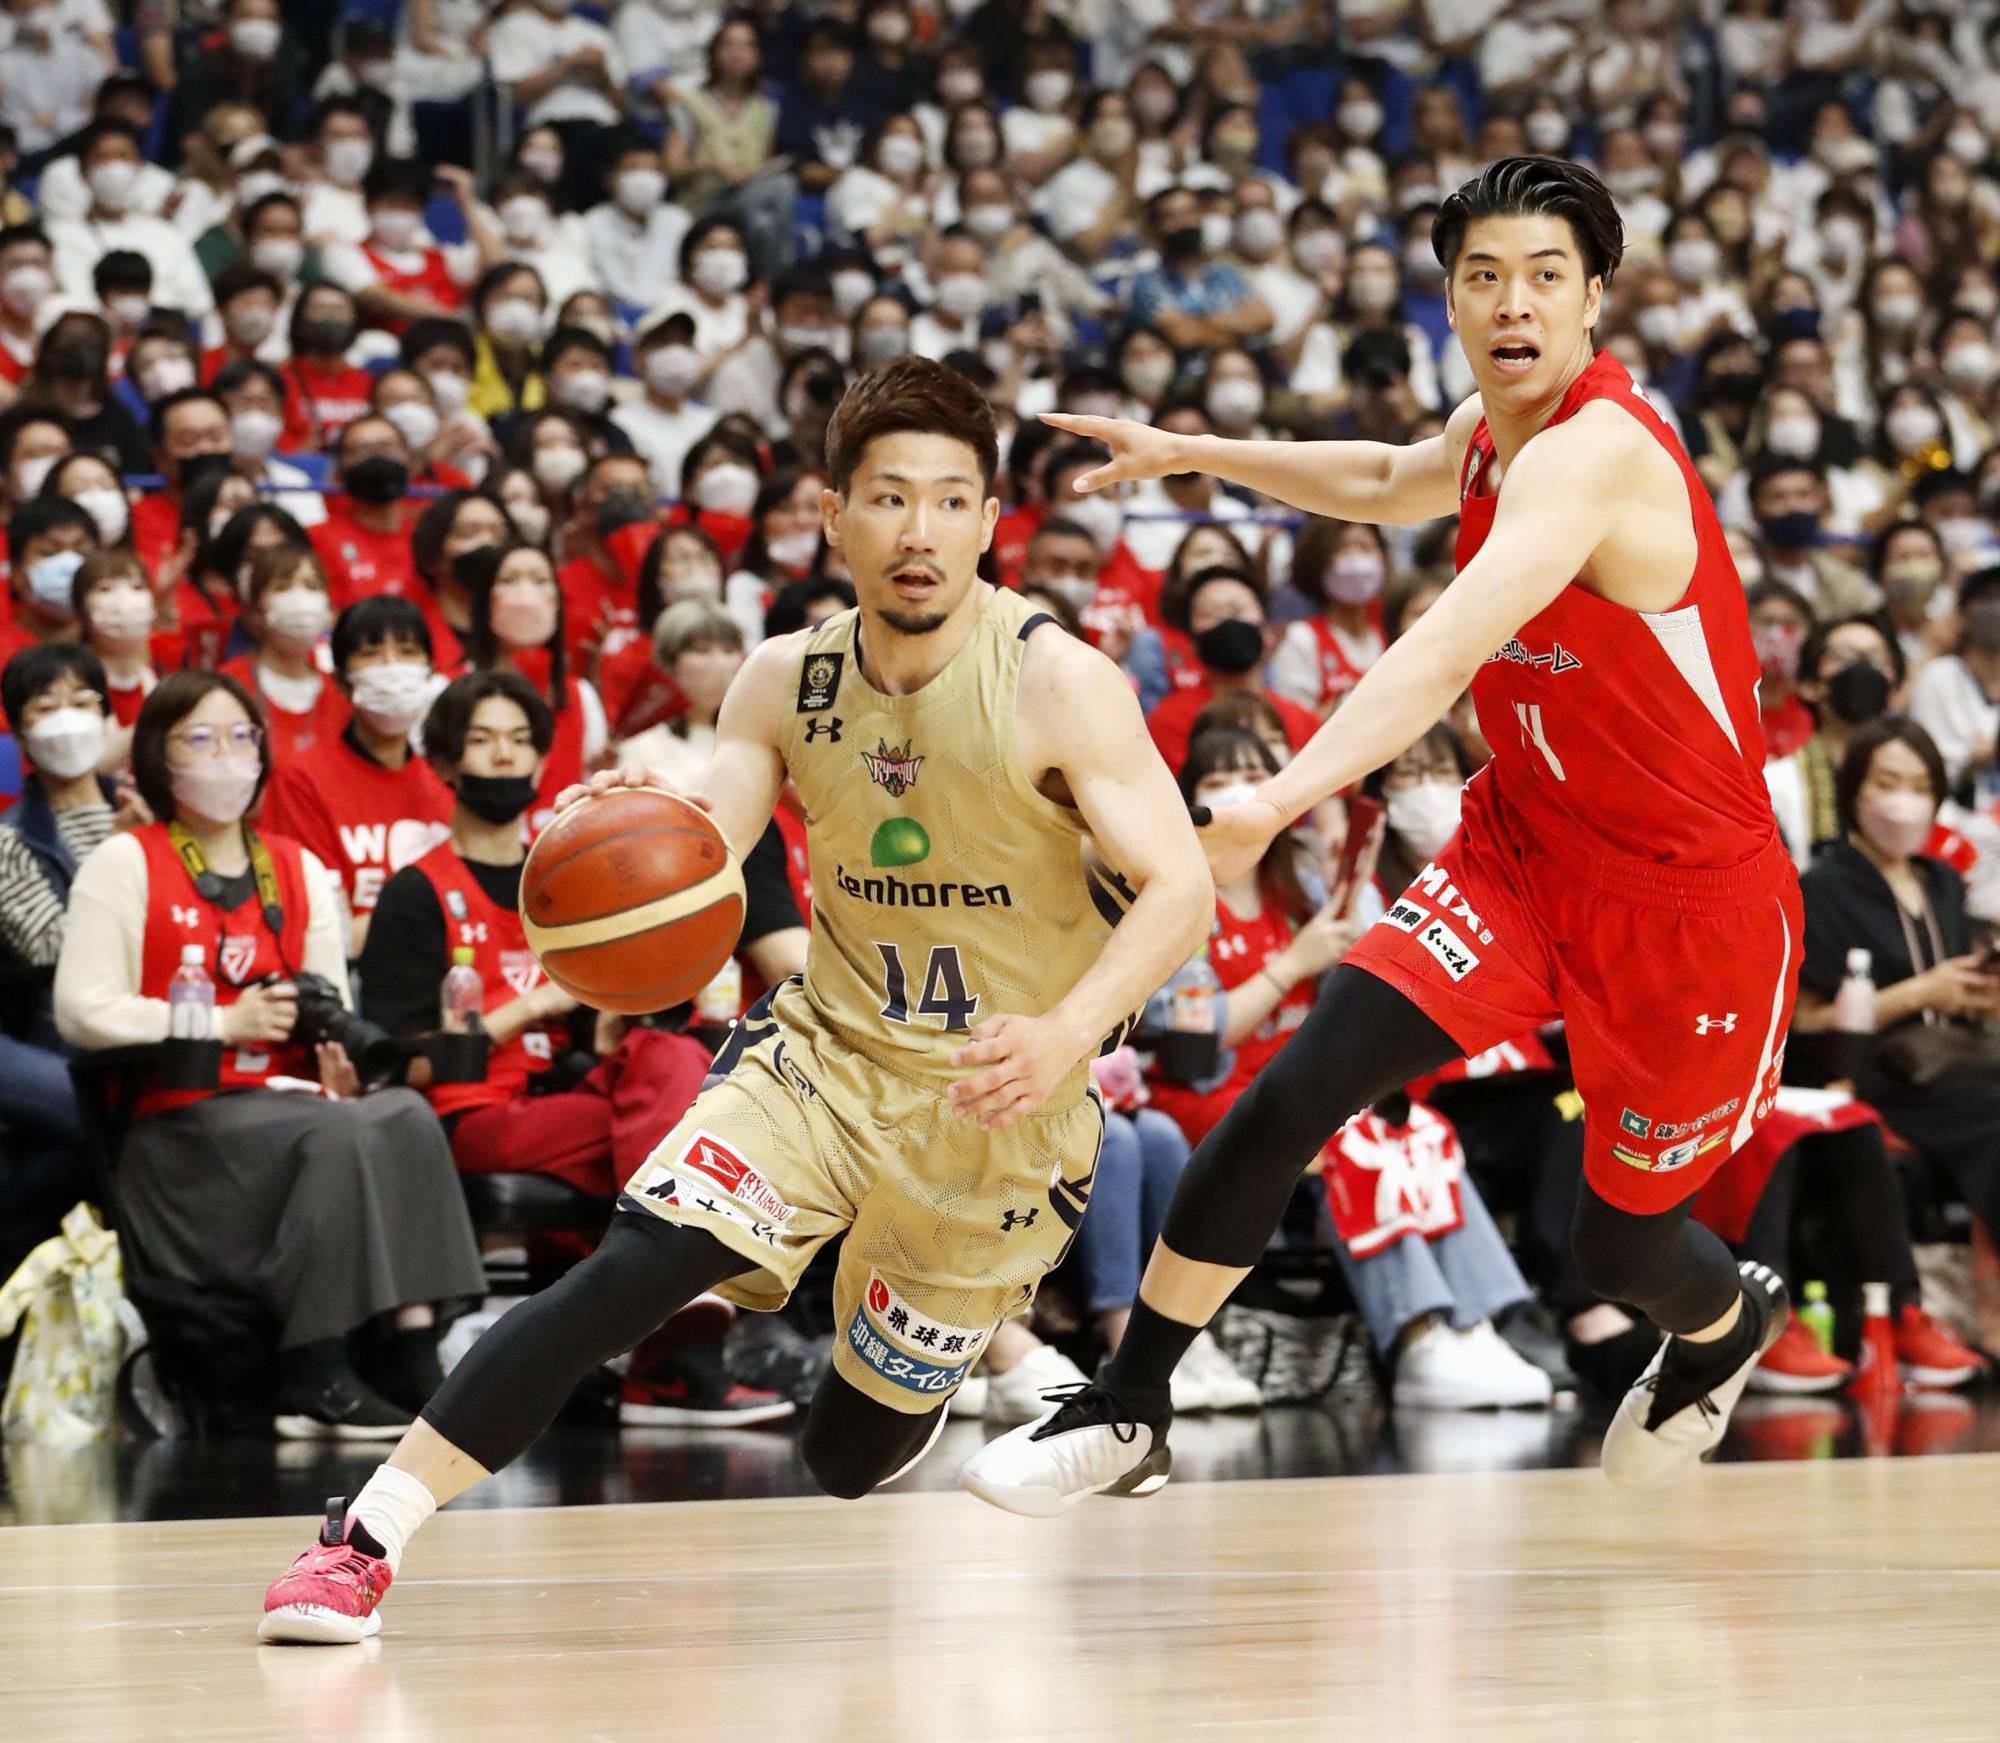 Ryukyu wins B. League Finals Game 1 against Chiba in double